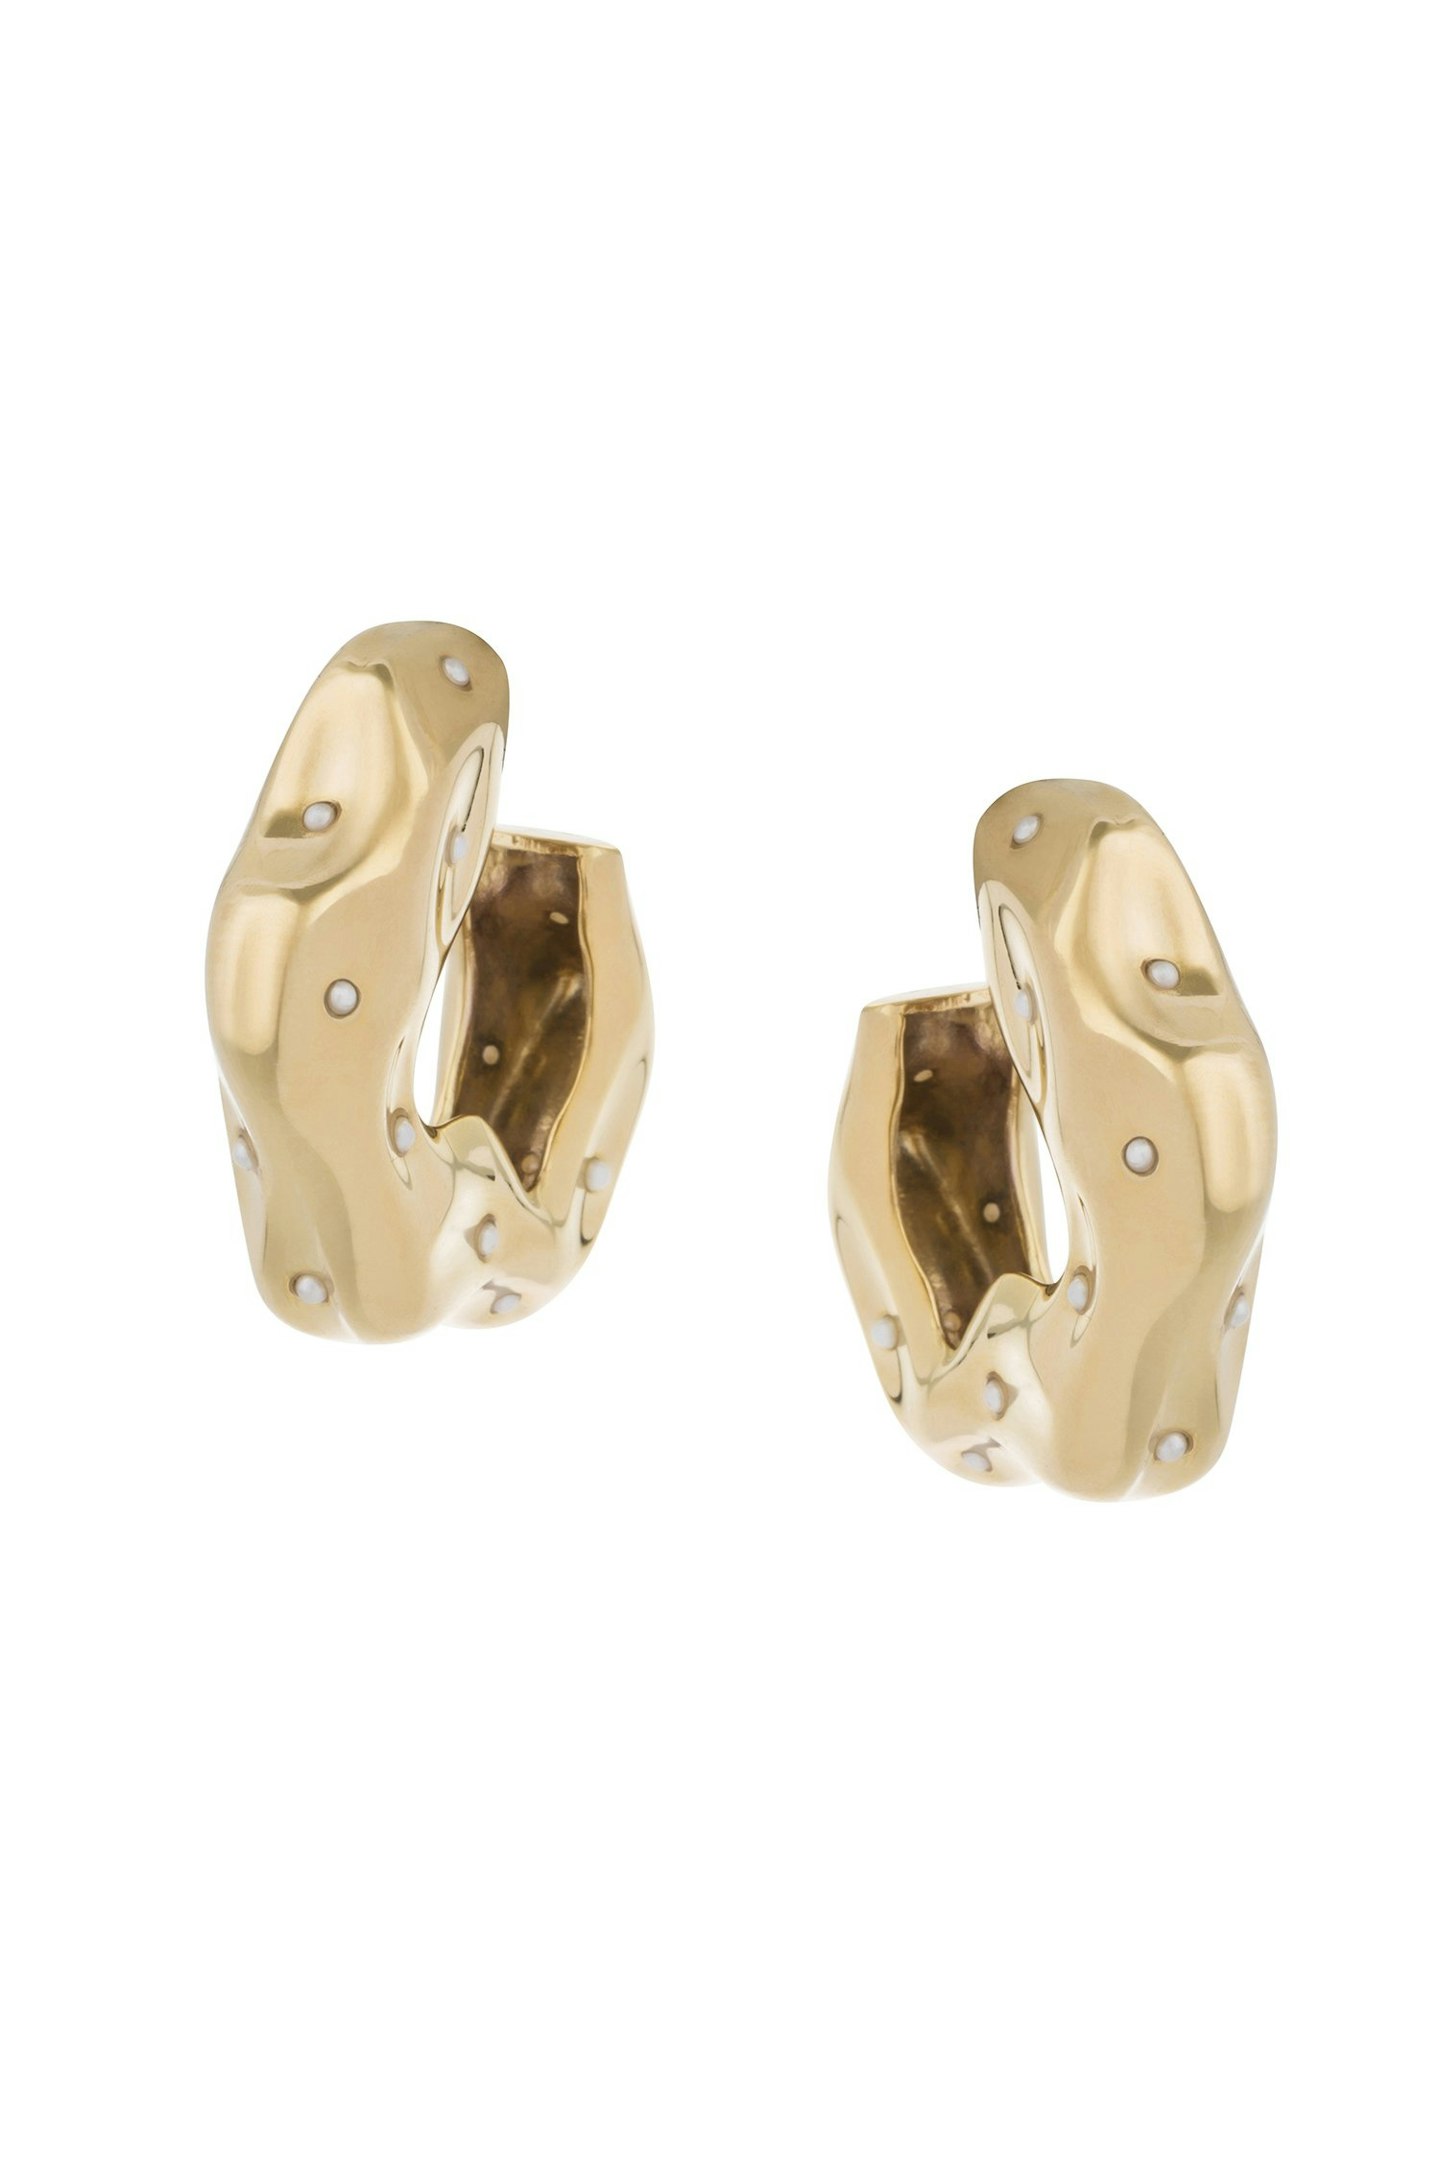 Cuff Earrings, £205, Joanna Laura Constantine at Browns Fashion